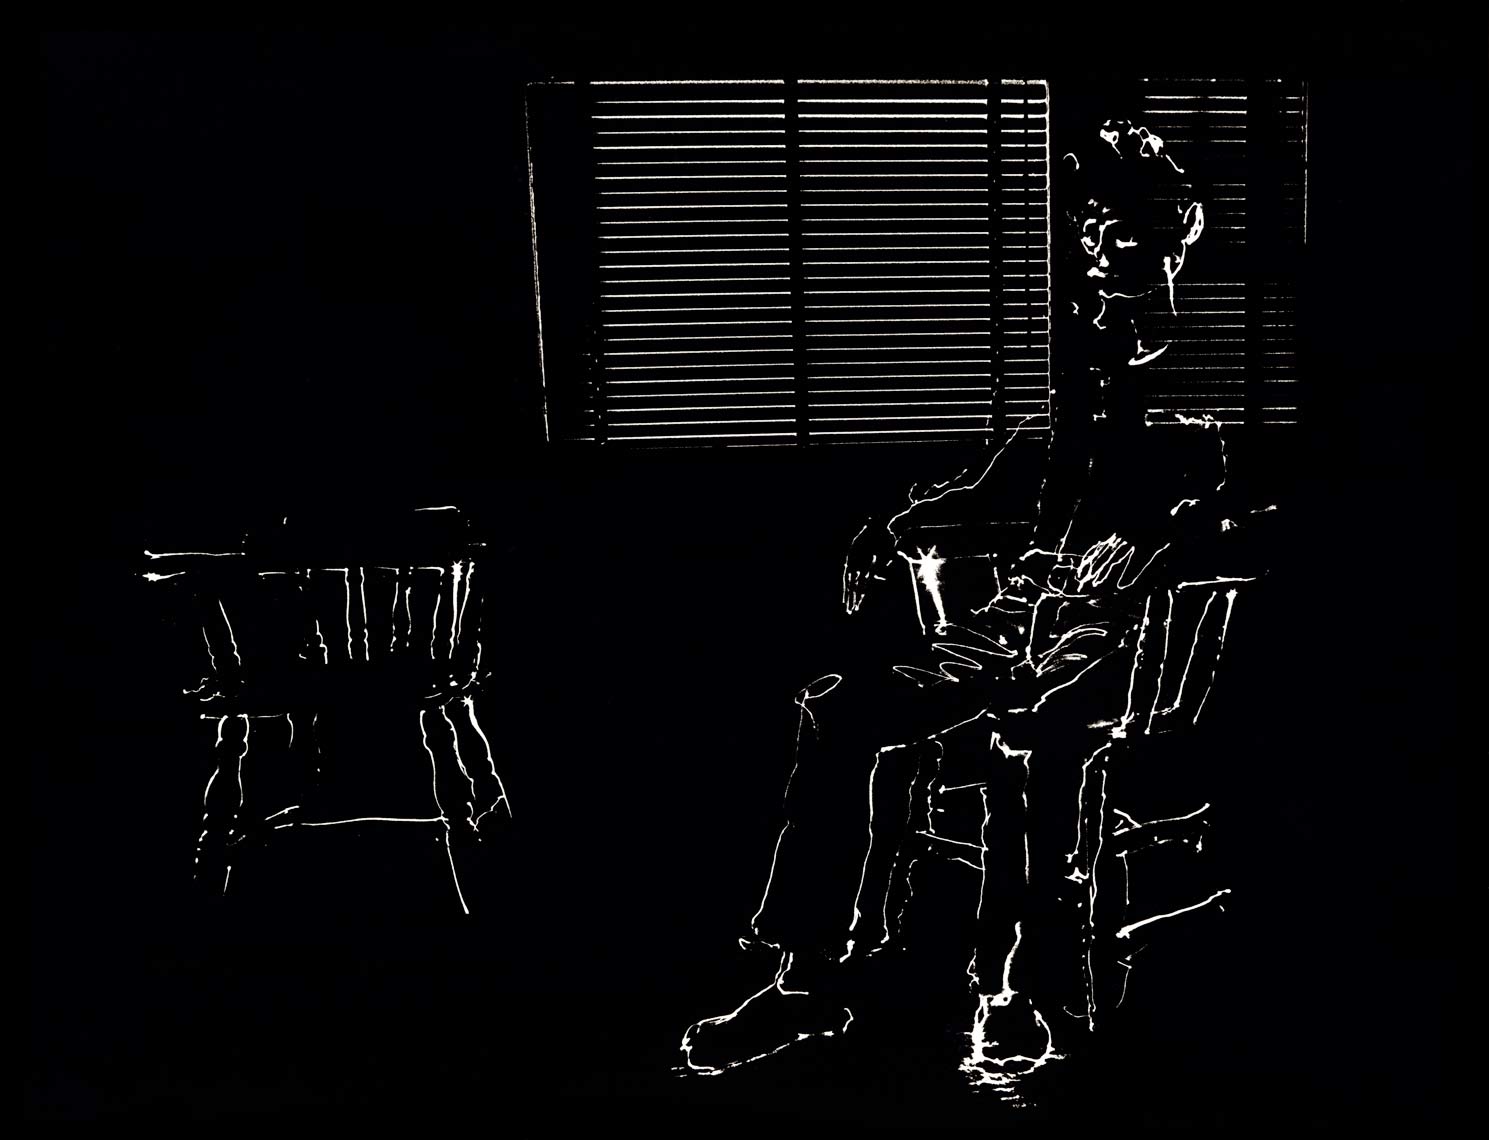 David Lebe; Self Portrait Venetian Blinds, male nude, 976, light drawing, black and white photograph